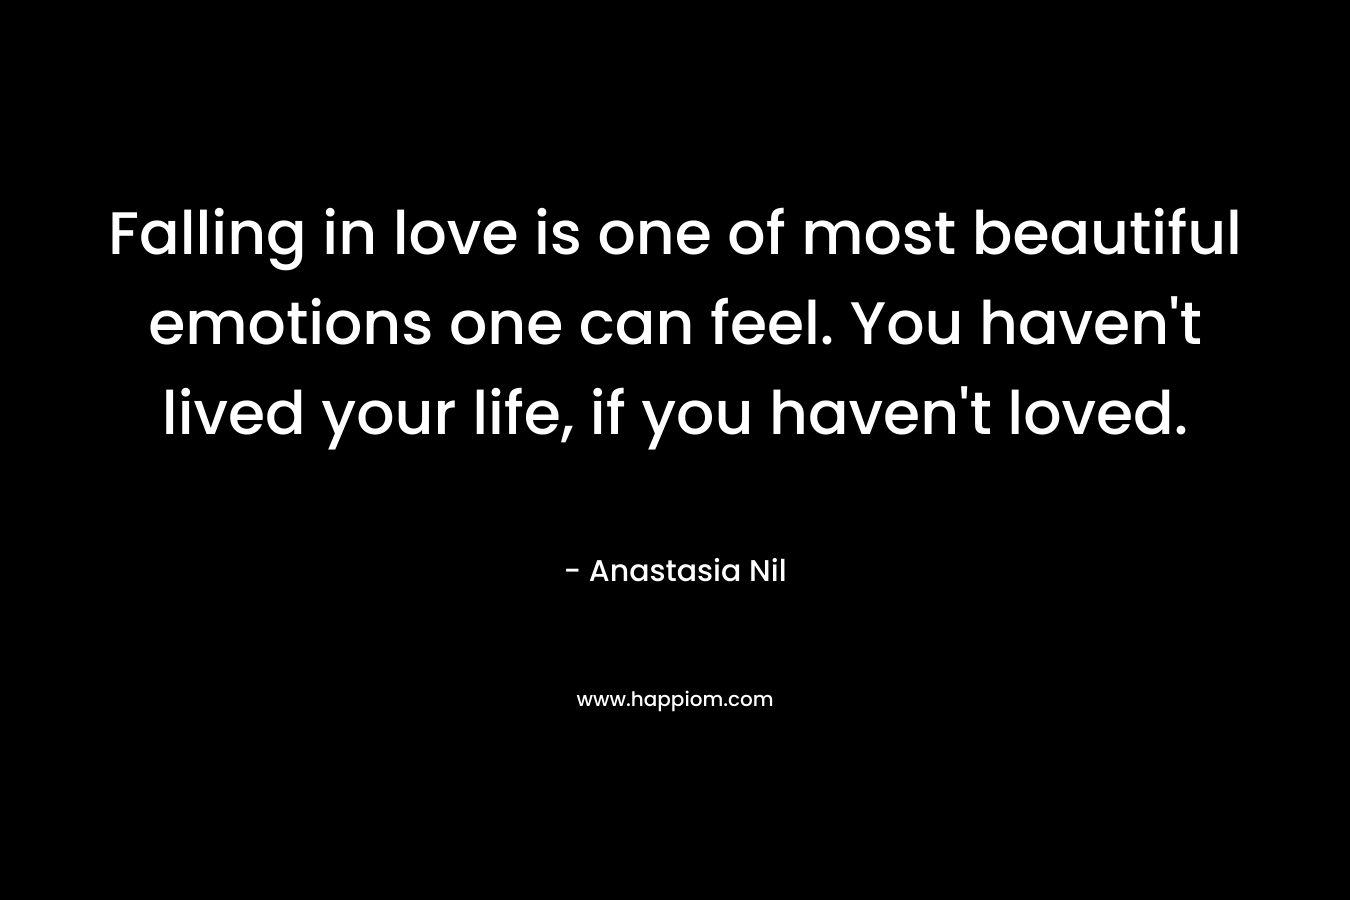 Falling in love is one of most beautiful emotions one can feel. You haven't lived your life, if you haven't loved.